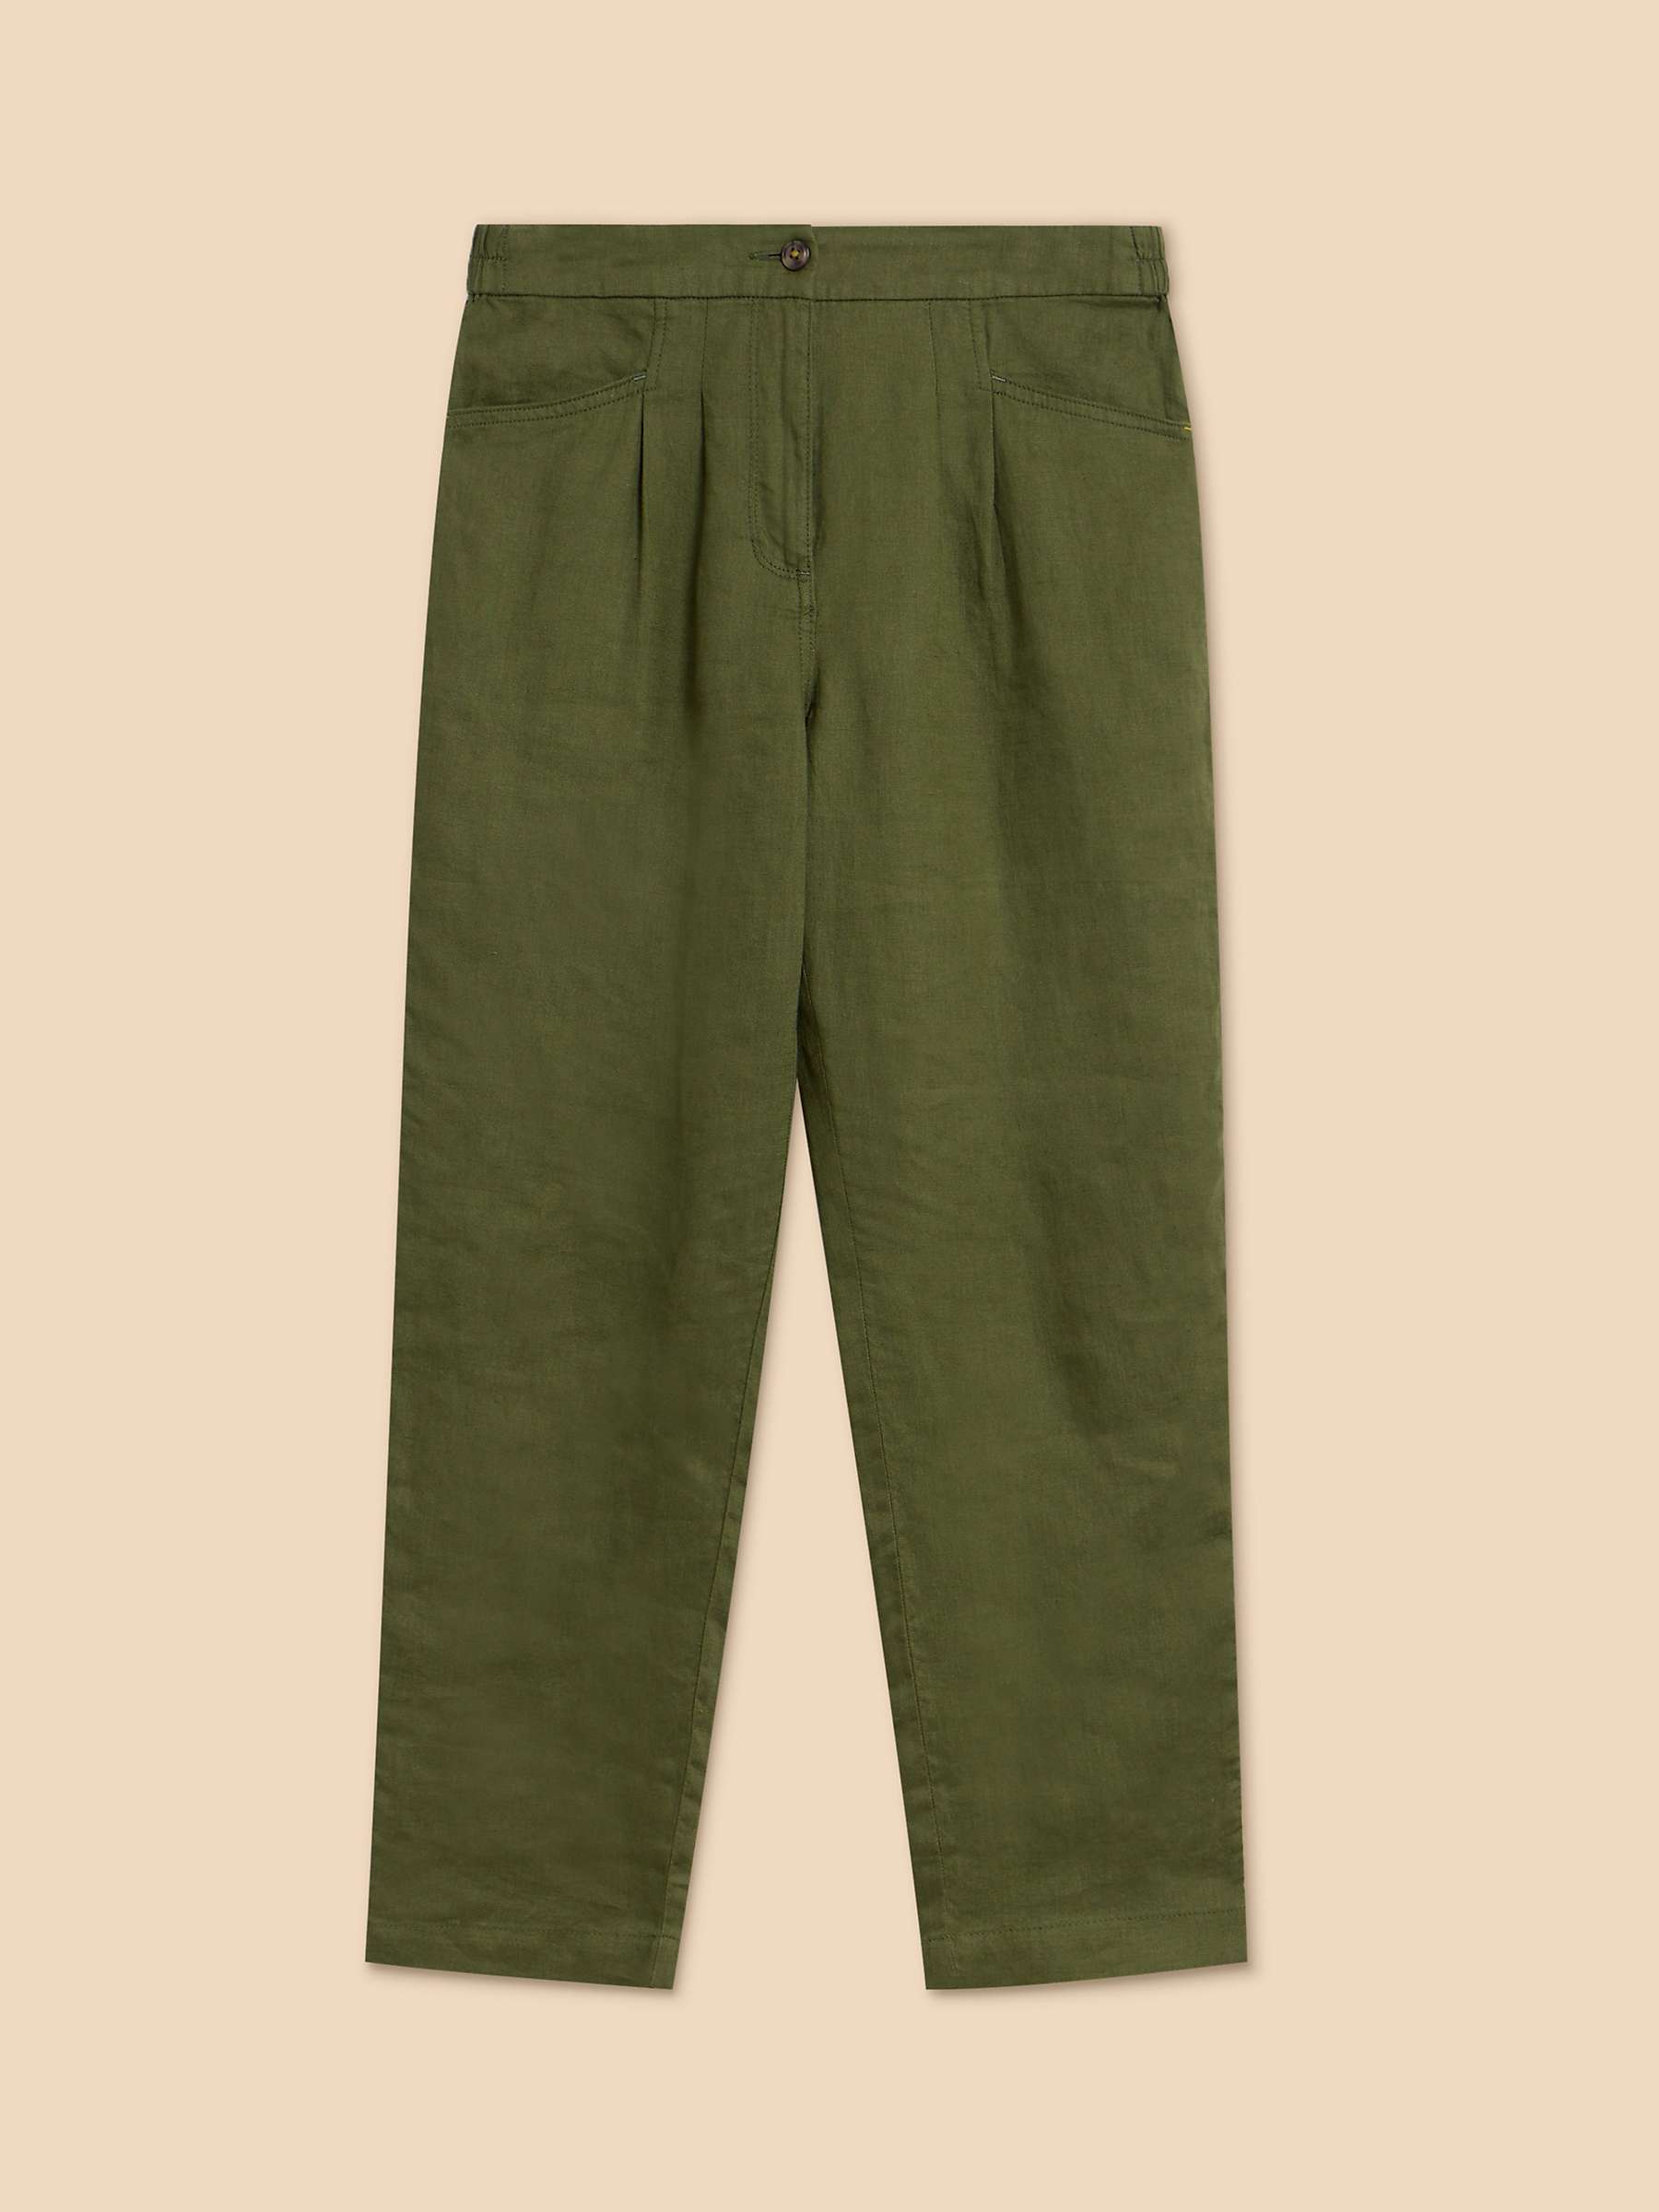 Buy White Stuff Rowena Linen Trousers Online at johnlewis.com